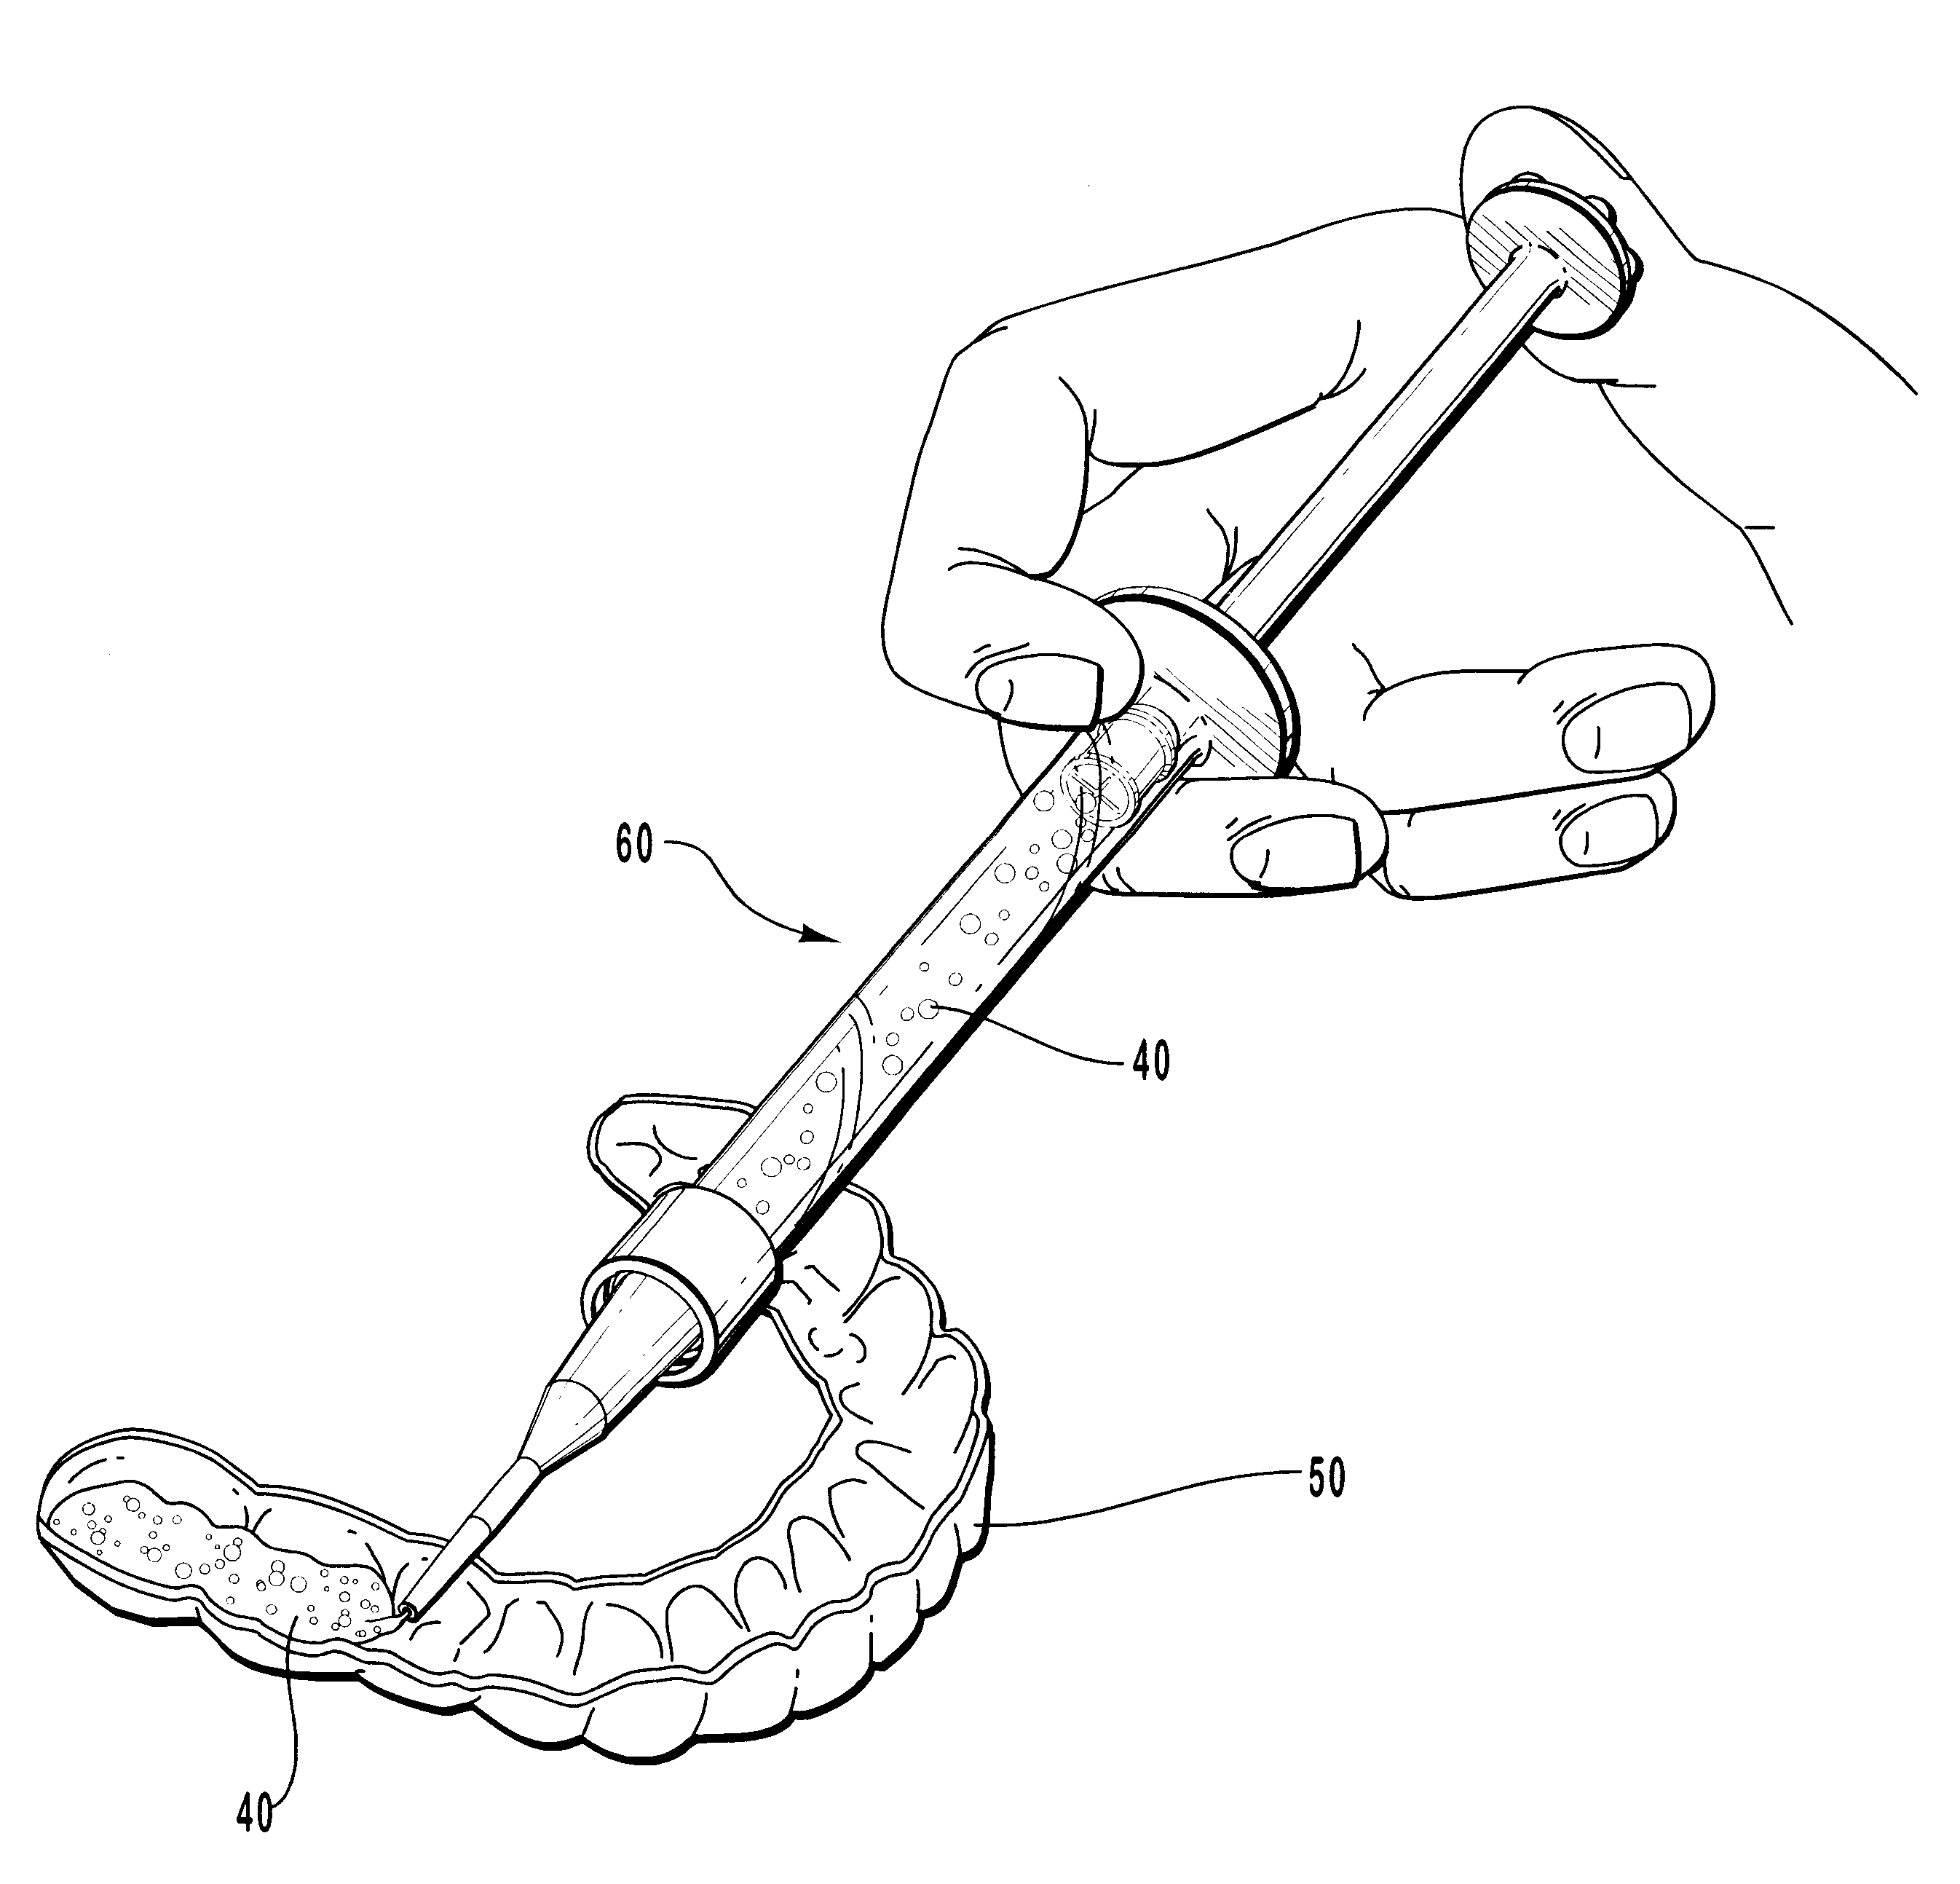 Compositions and methods for whitening and desensitizing teeth